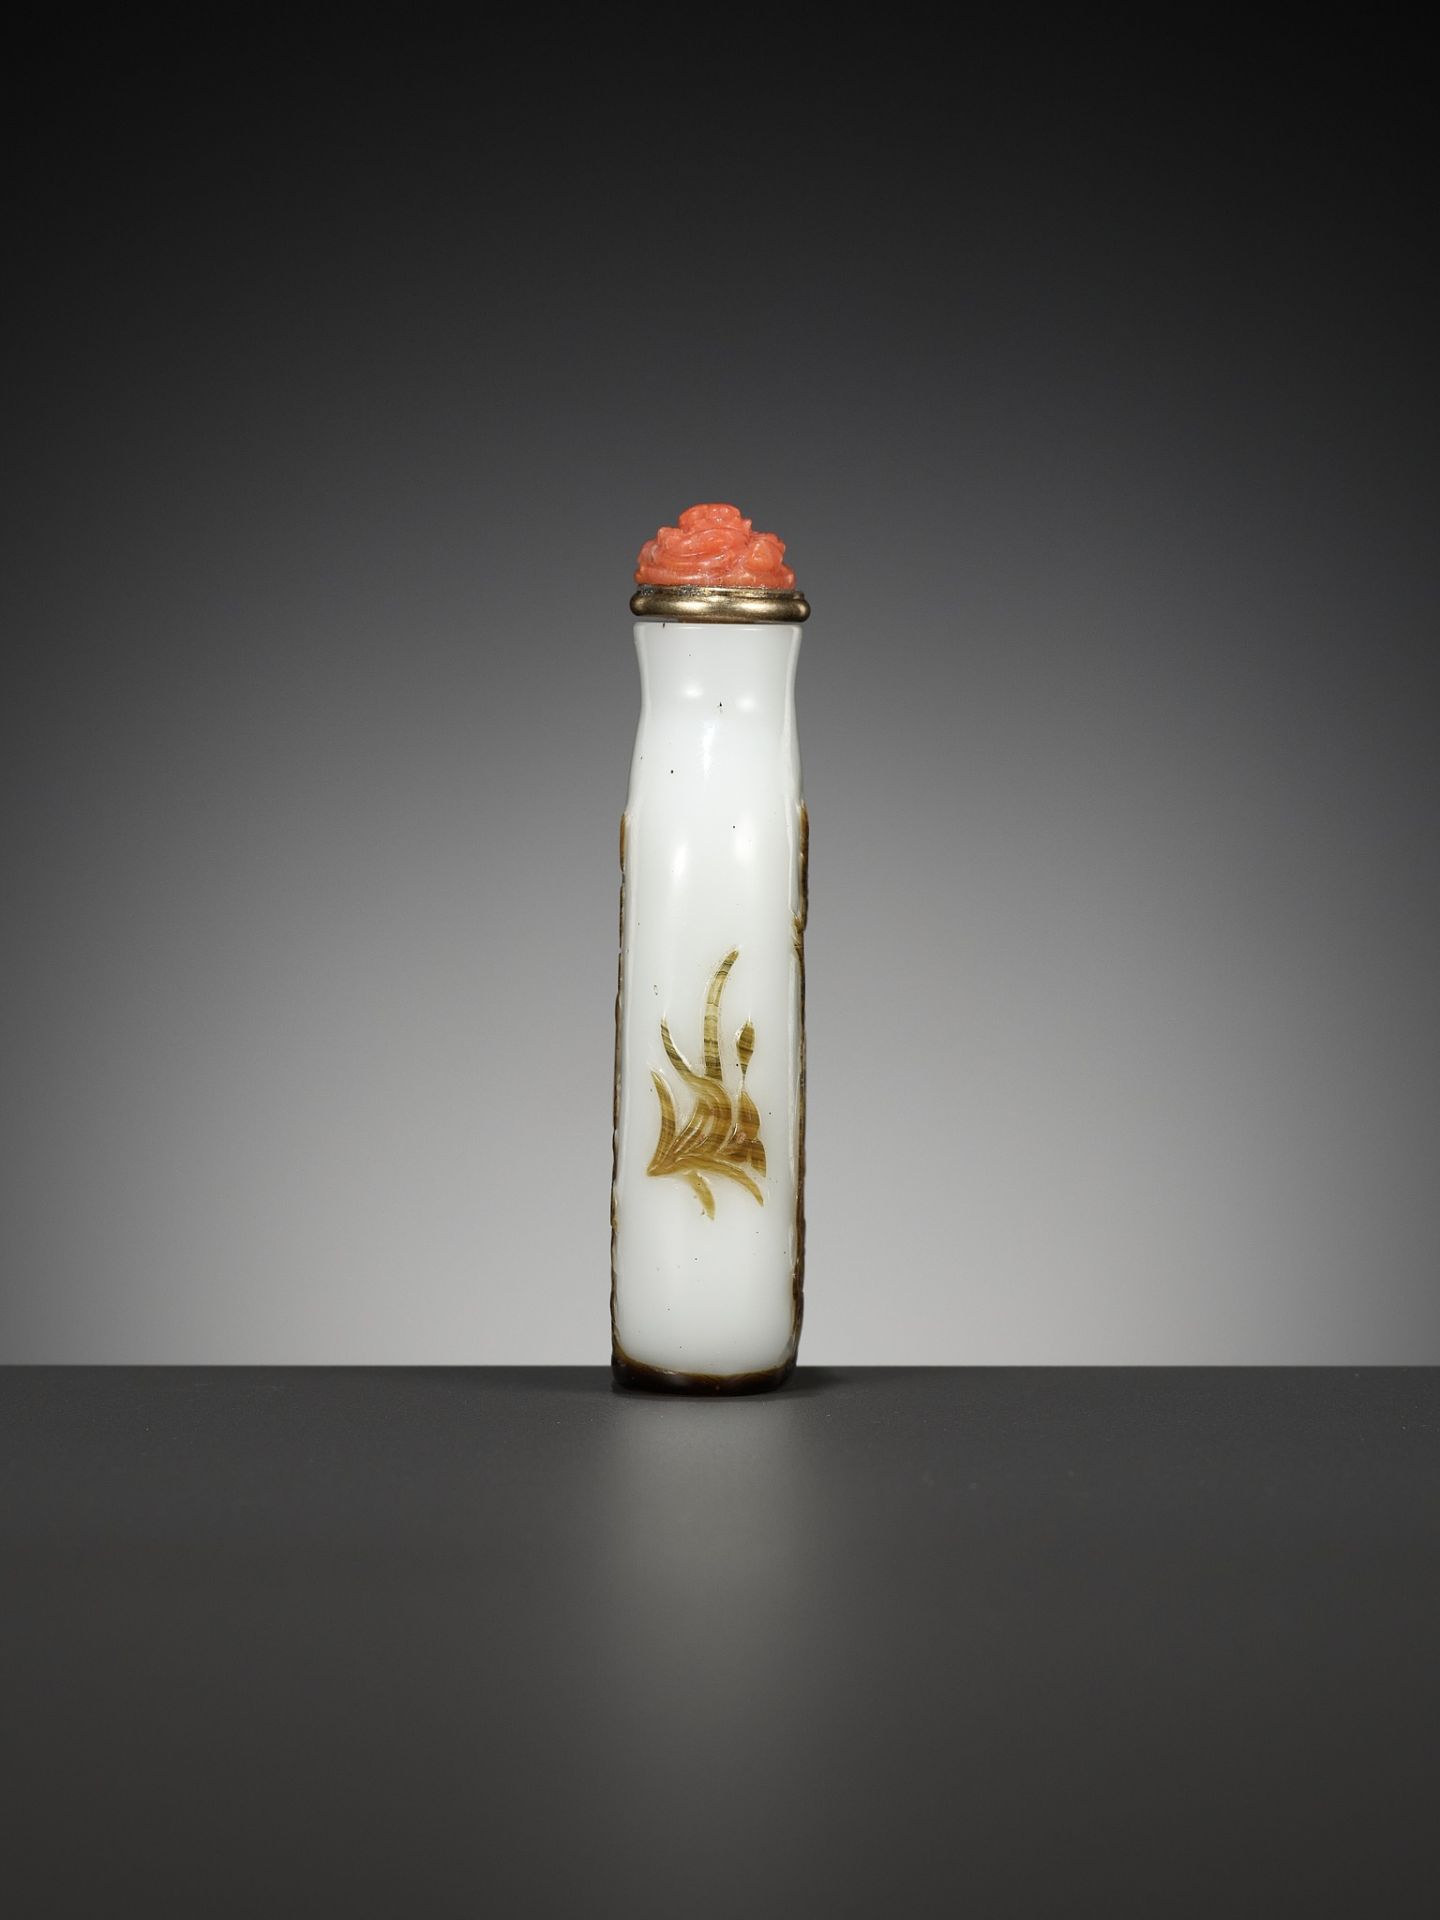 AN INSCRIBED OVERLAY GLASS ‘CAT AND BUTTERFLY’ SNUFF BOTTLE, BY WANG SU, YANGZHOU SCHOOL, 1820-1840 - Image 12 of 19